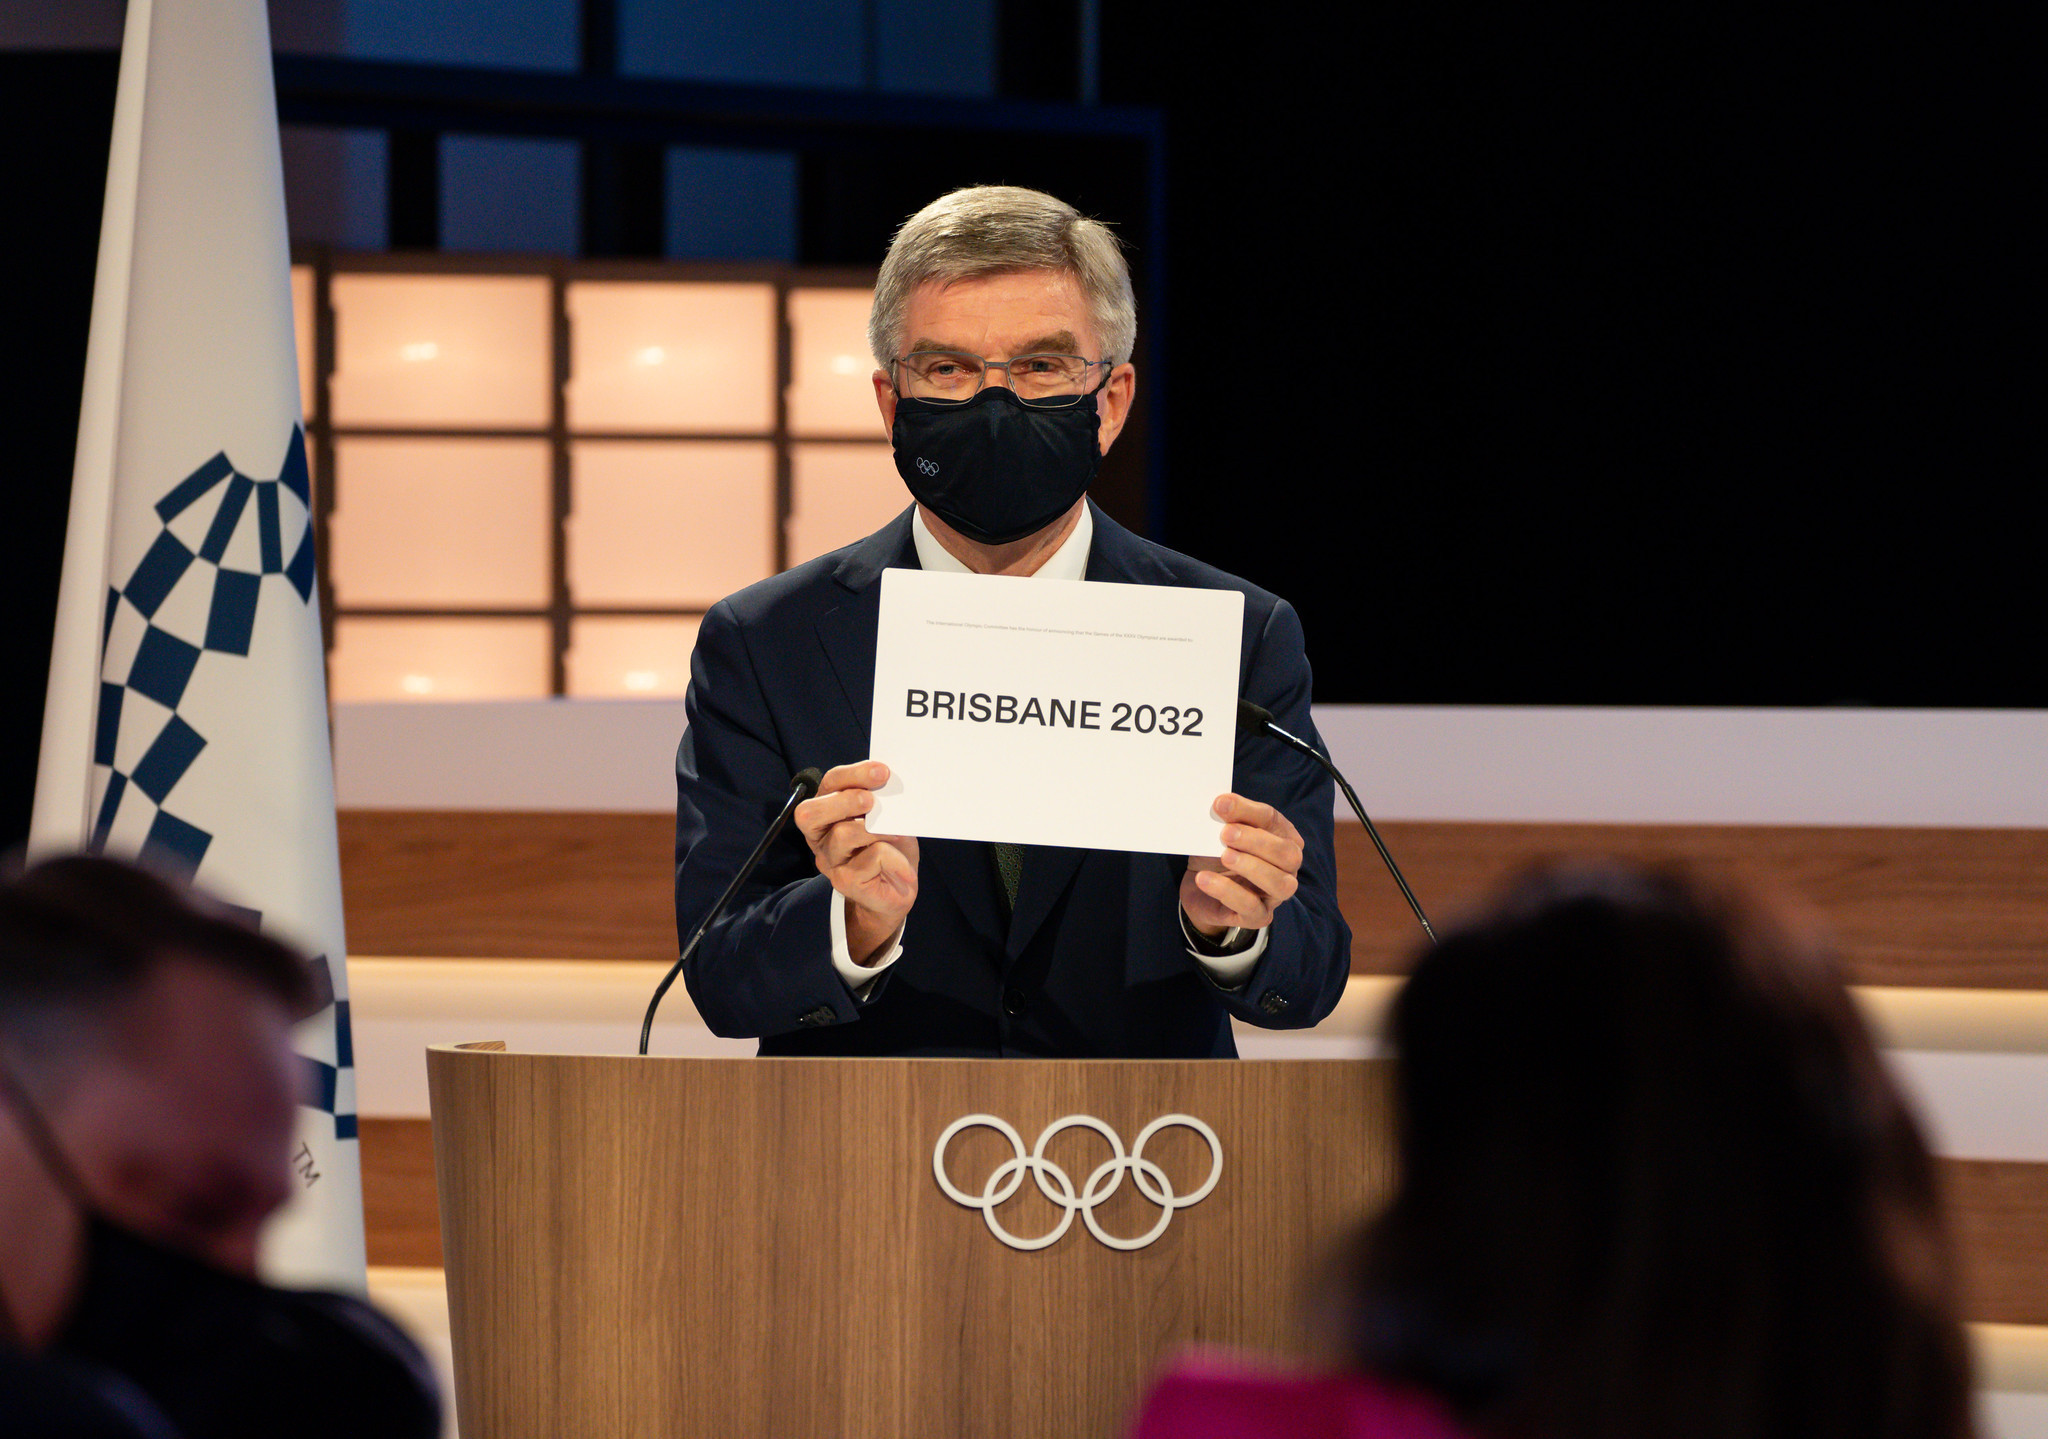 Brisbane was confirmed as host of the 2032 Olympic and Paralympic Games ©IOC